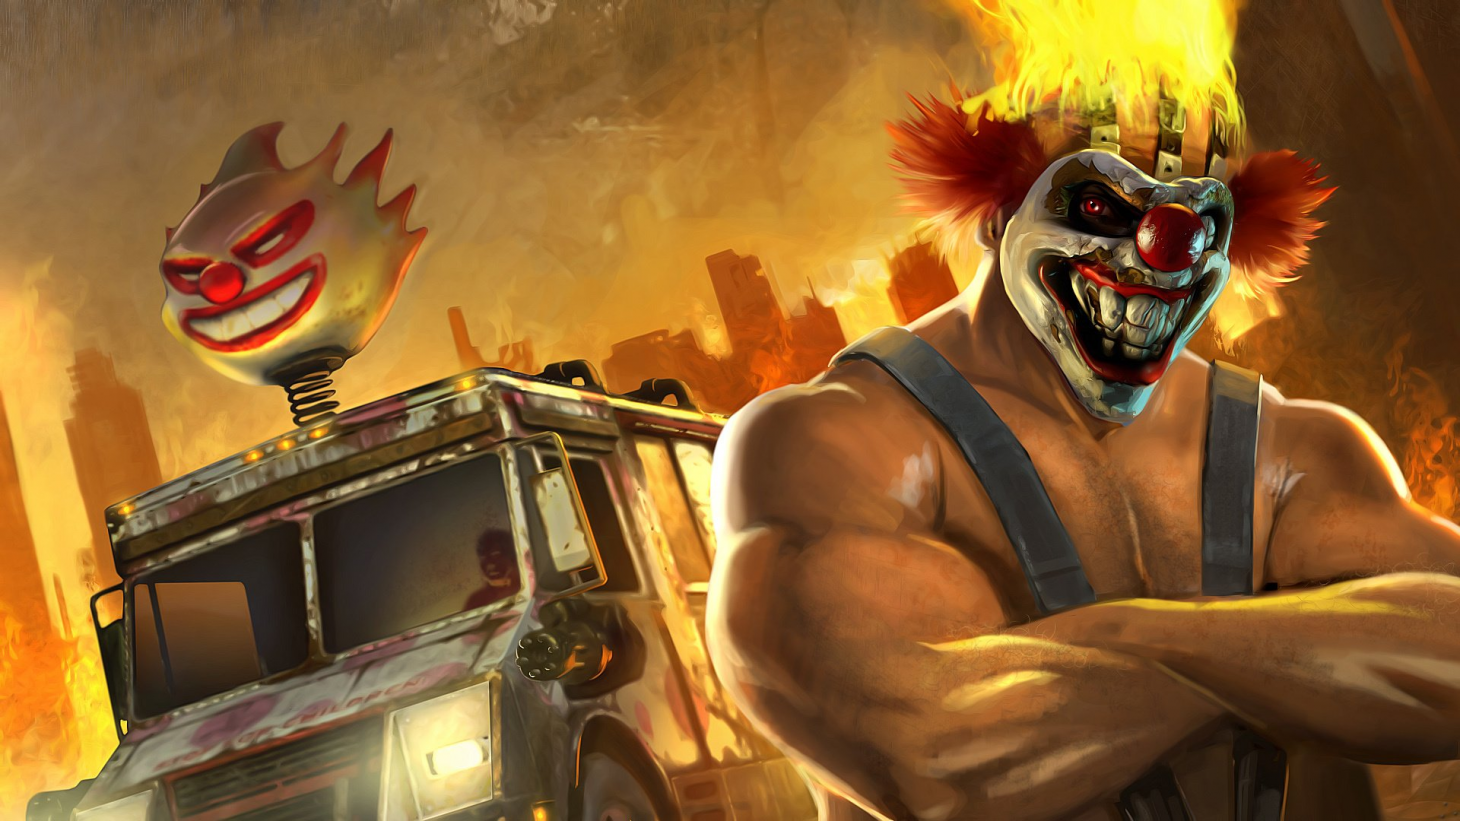 Play PlayStation Twisted Metal 4 Online in your browser 